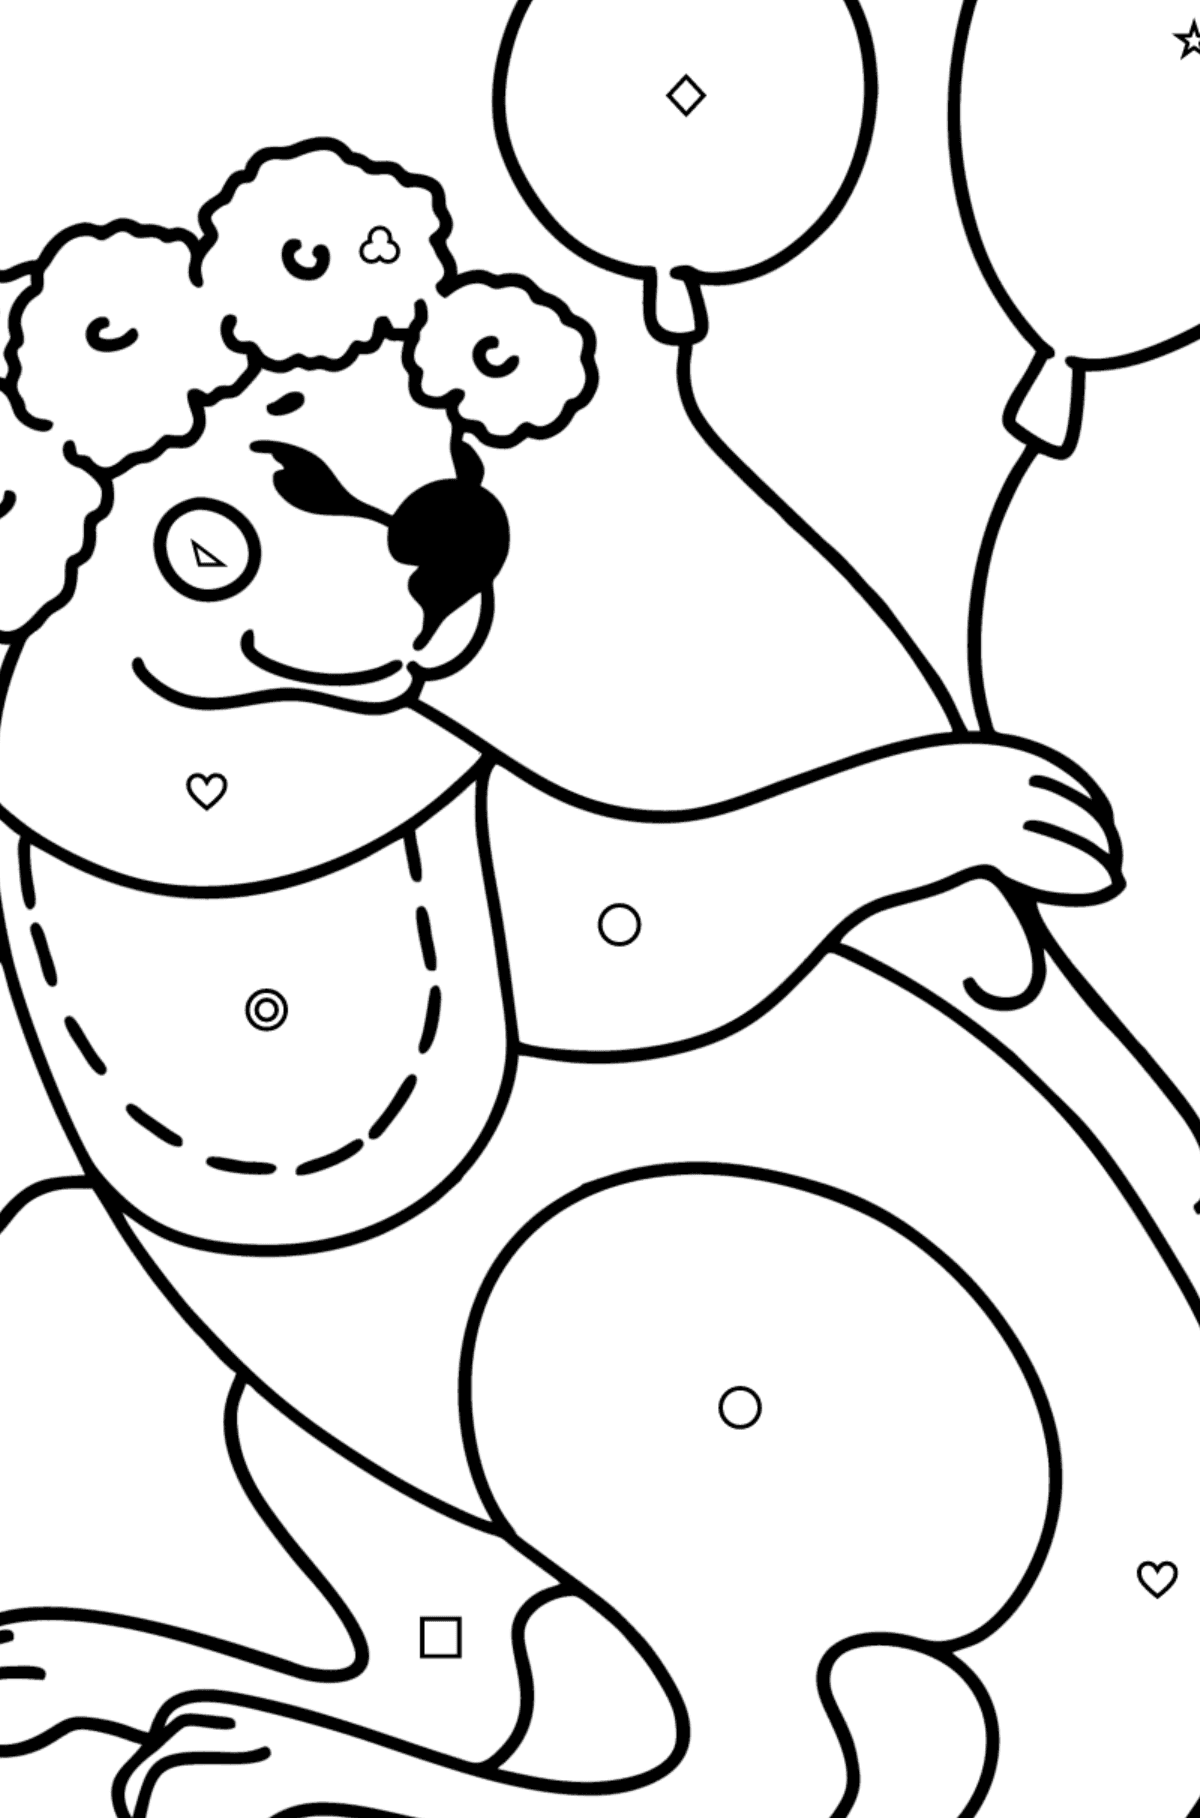 Beautiful Coloring page - Cartoon Baby Kangaroo - Coloring by Geometric Shapes for Kids